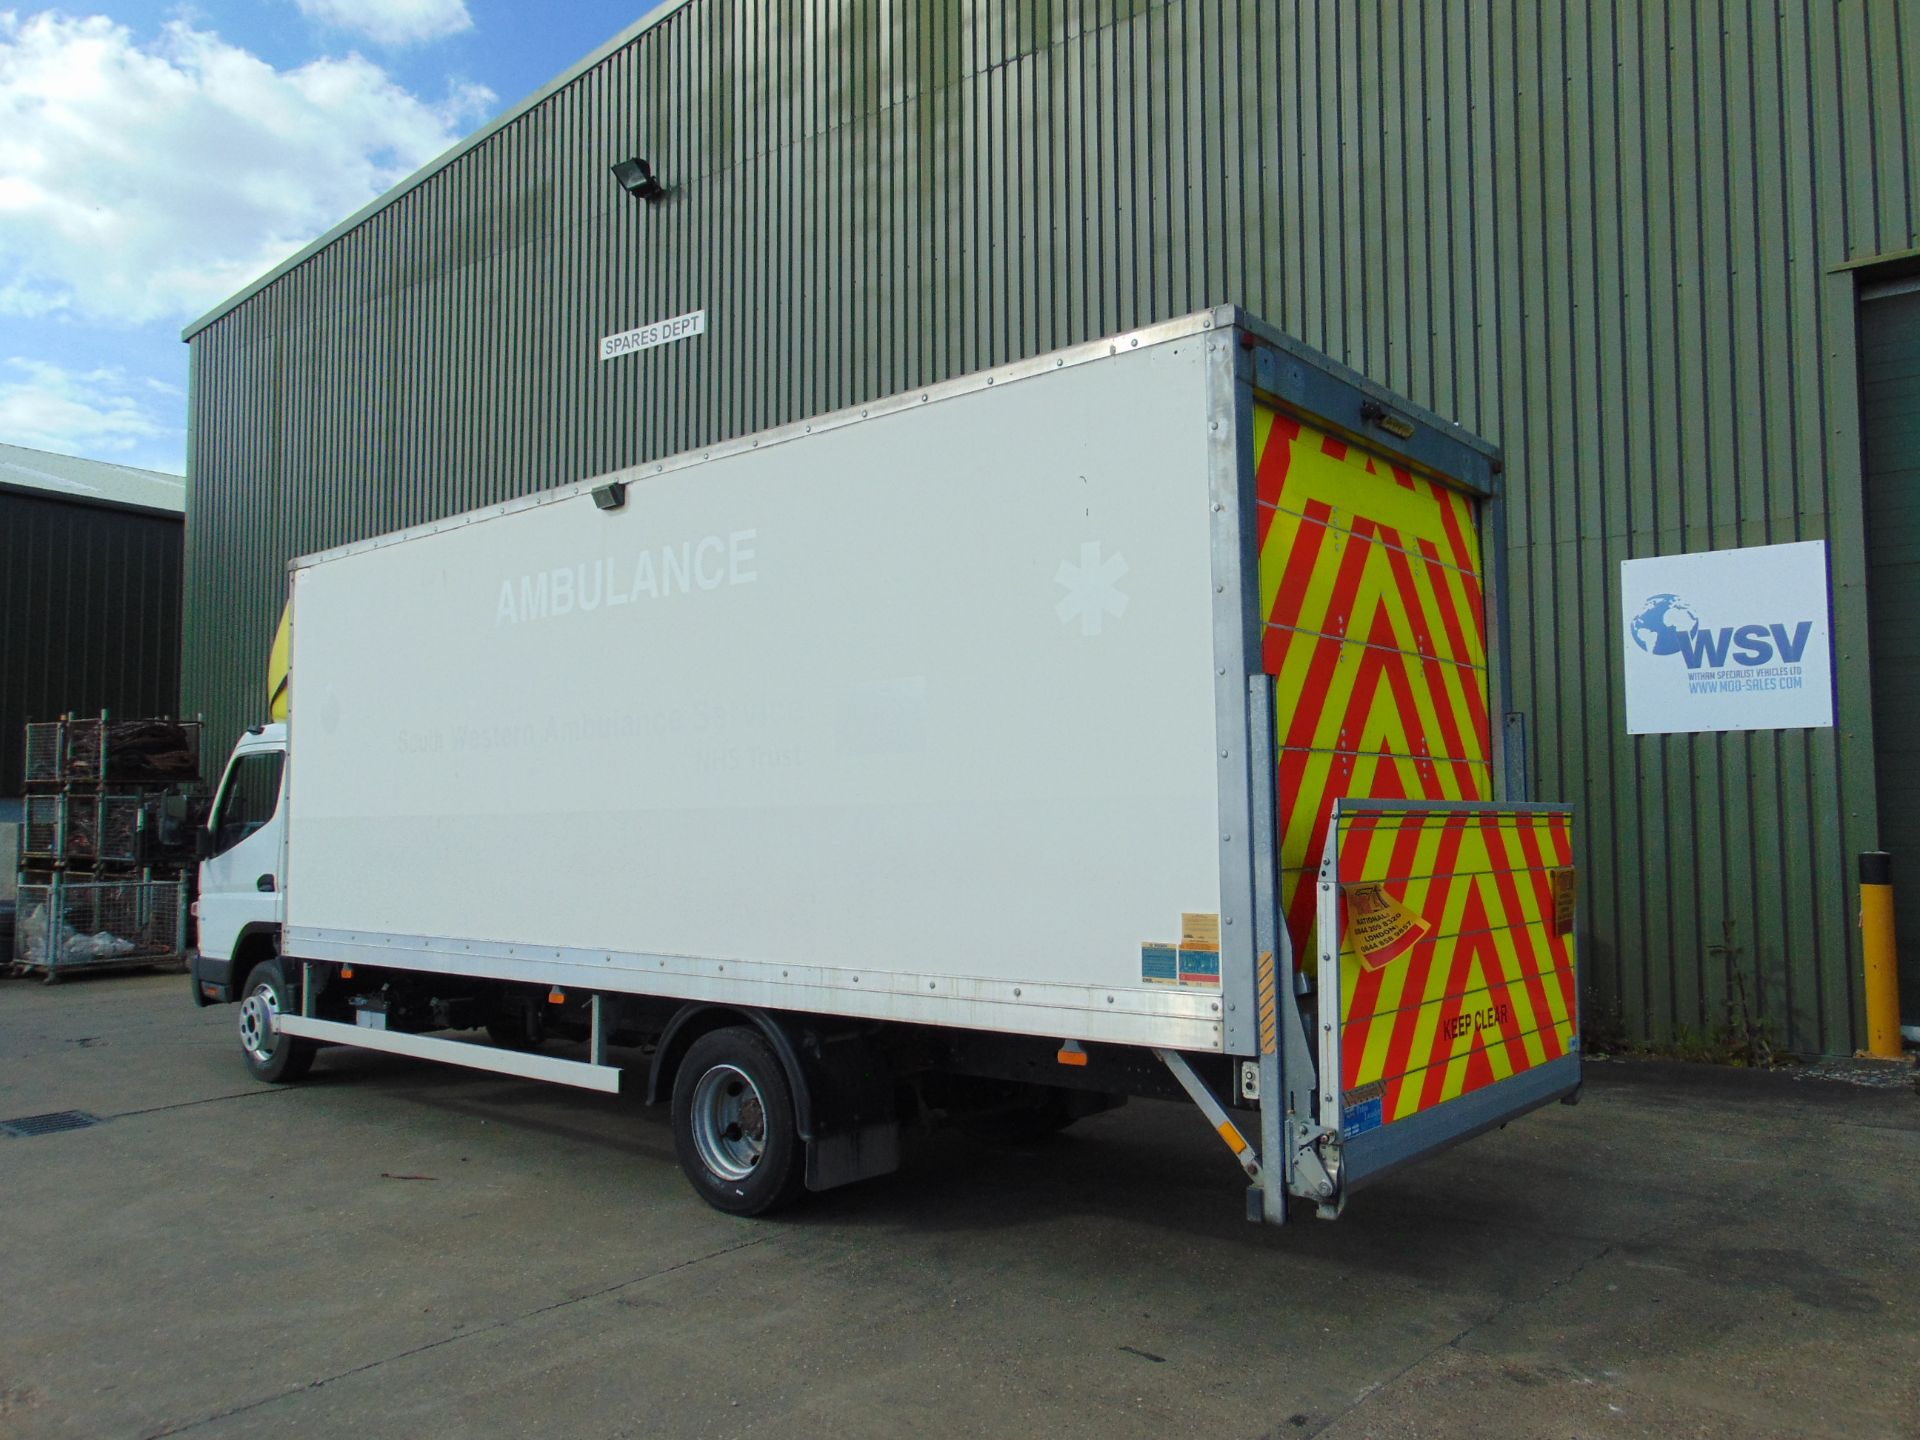 2011 Mitsubishi Fuso Canter Box lorry 7.5T - Only 5400 Miles! - Image 7 of 51